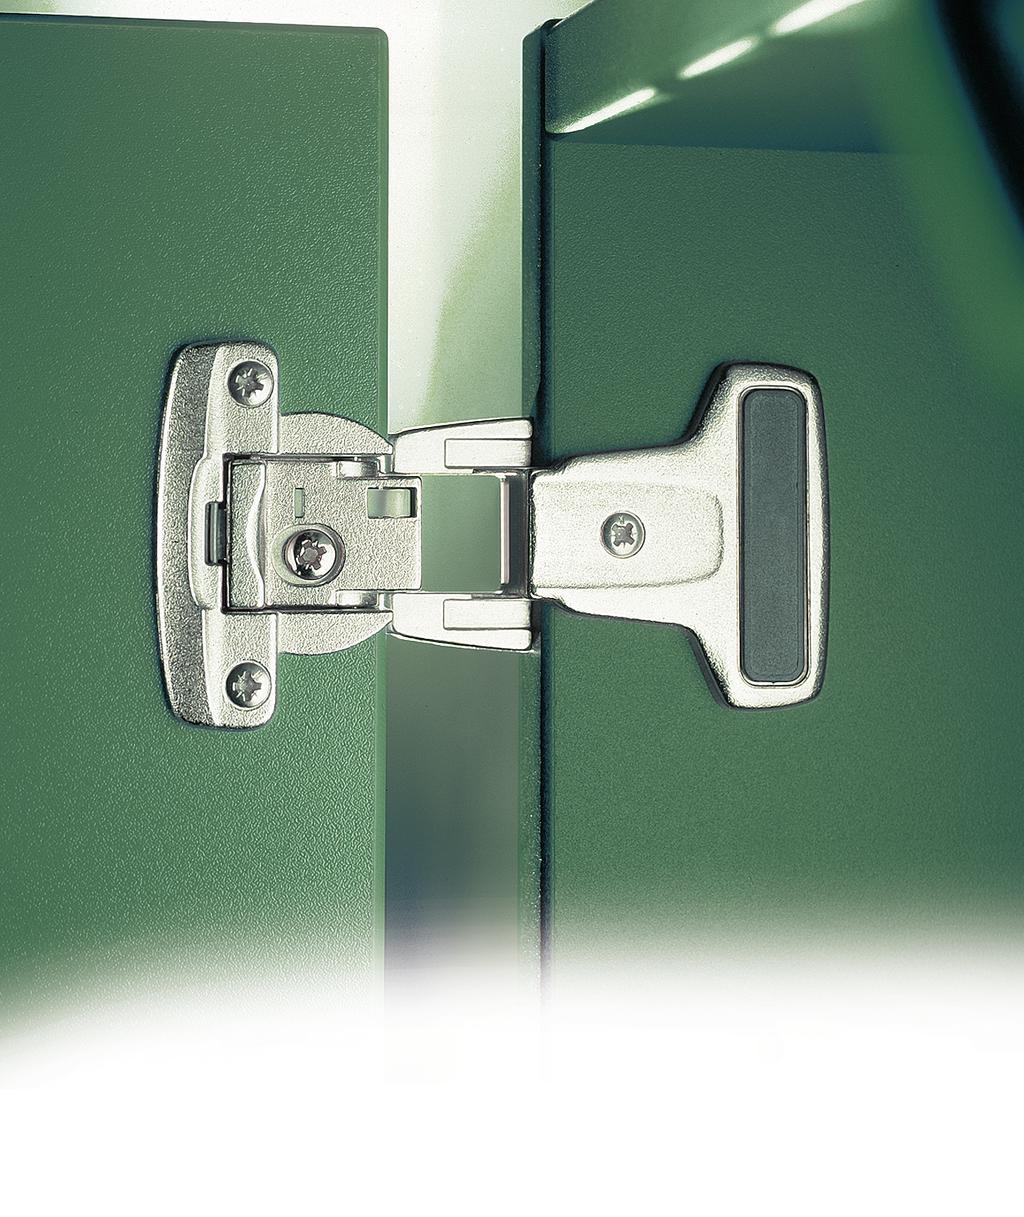 Hetal_Brochure_042908_Grass brochure1 10/13/14 2:33 PM Page 4 Grass Institutional Hinges Grass Institutional Hinges offer the per- weight bearing cababilities.